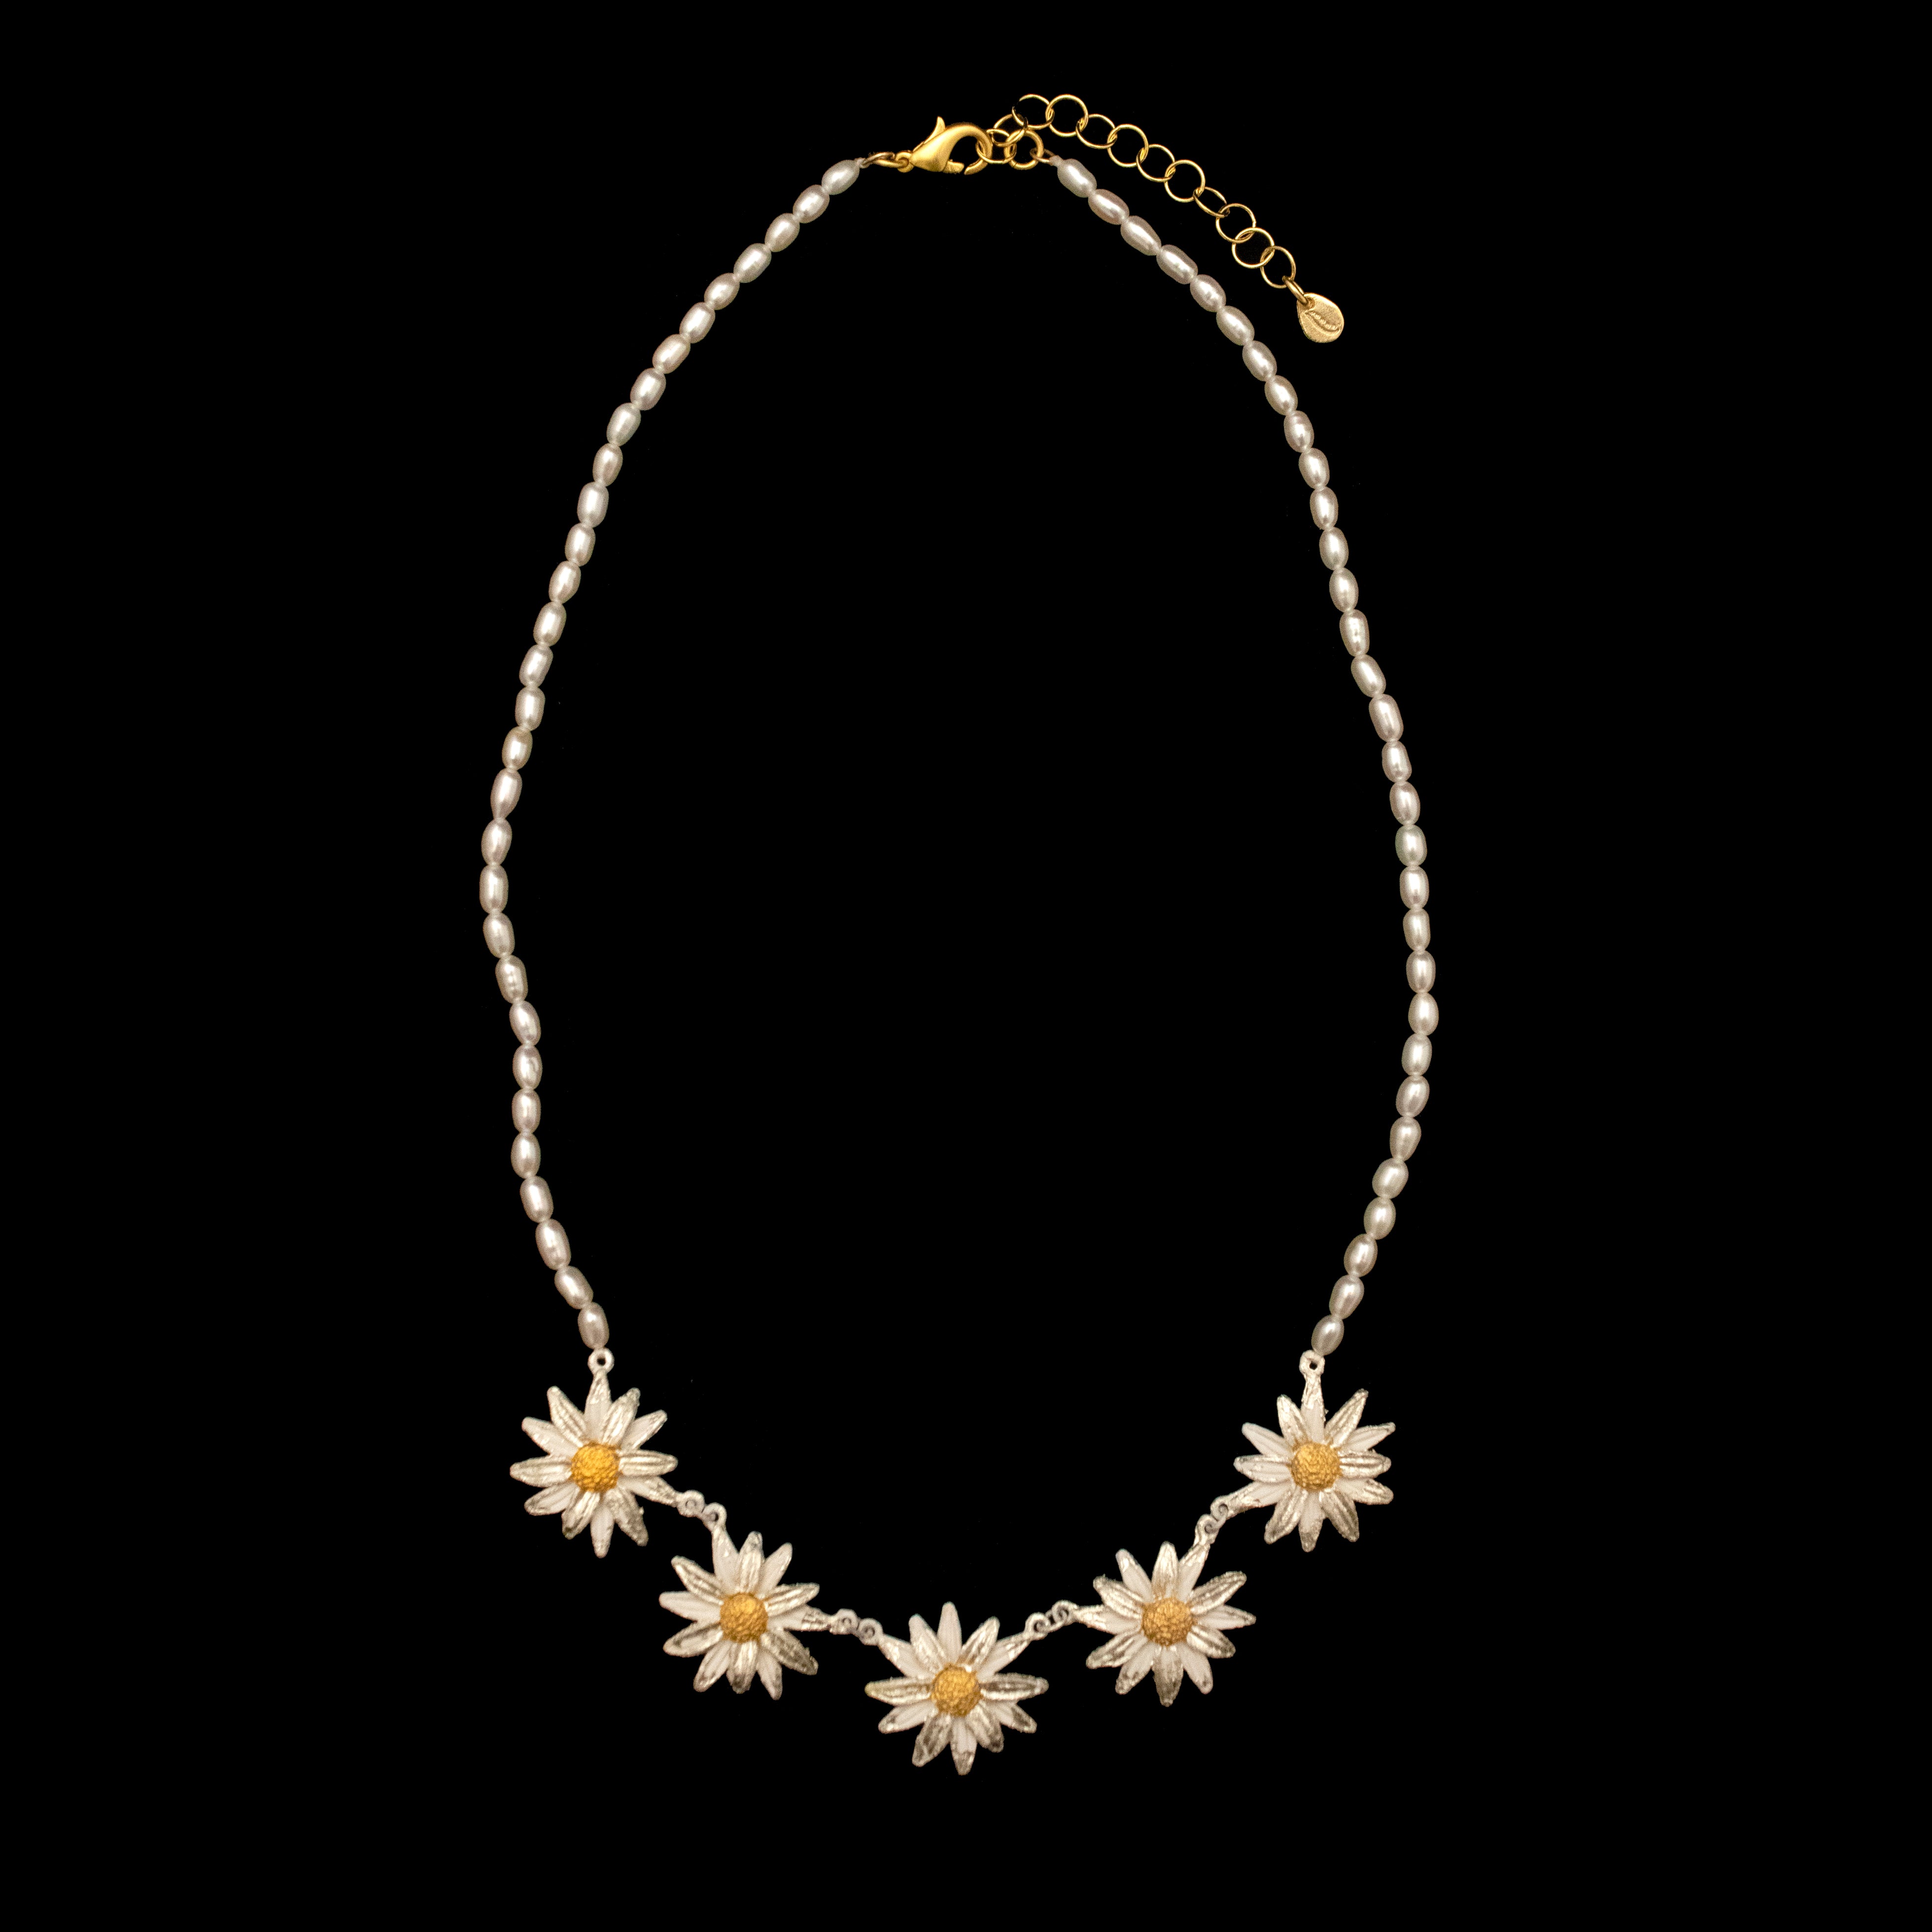 Daisy Necklace on Pearl - Web Exclusive